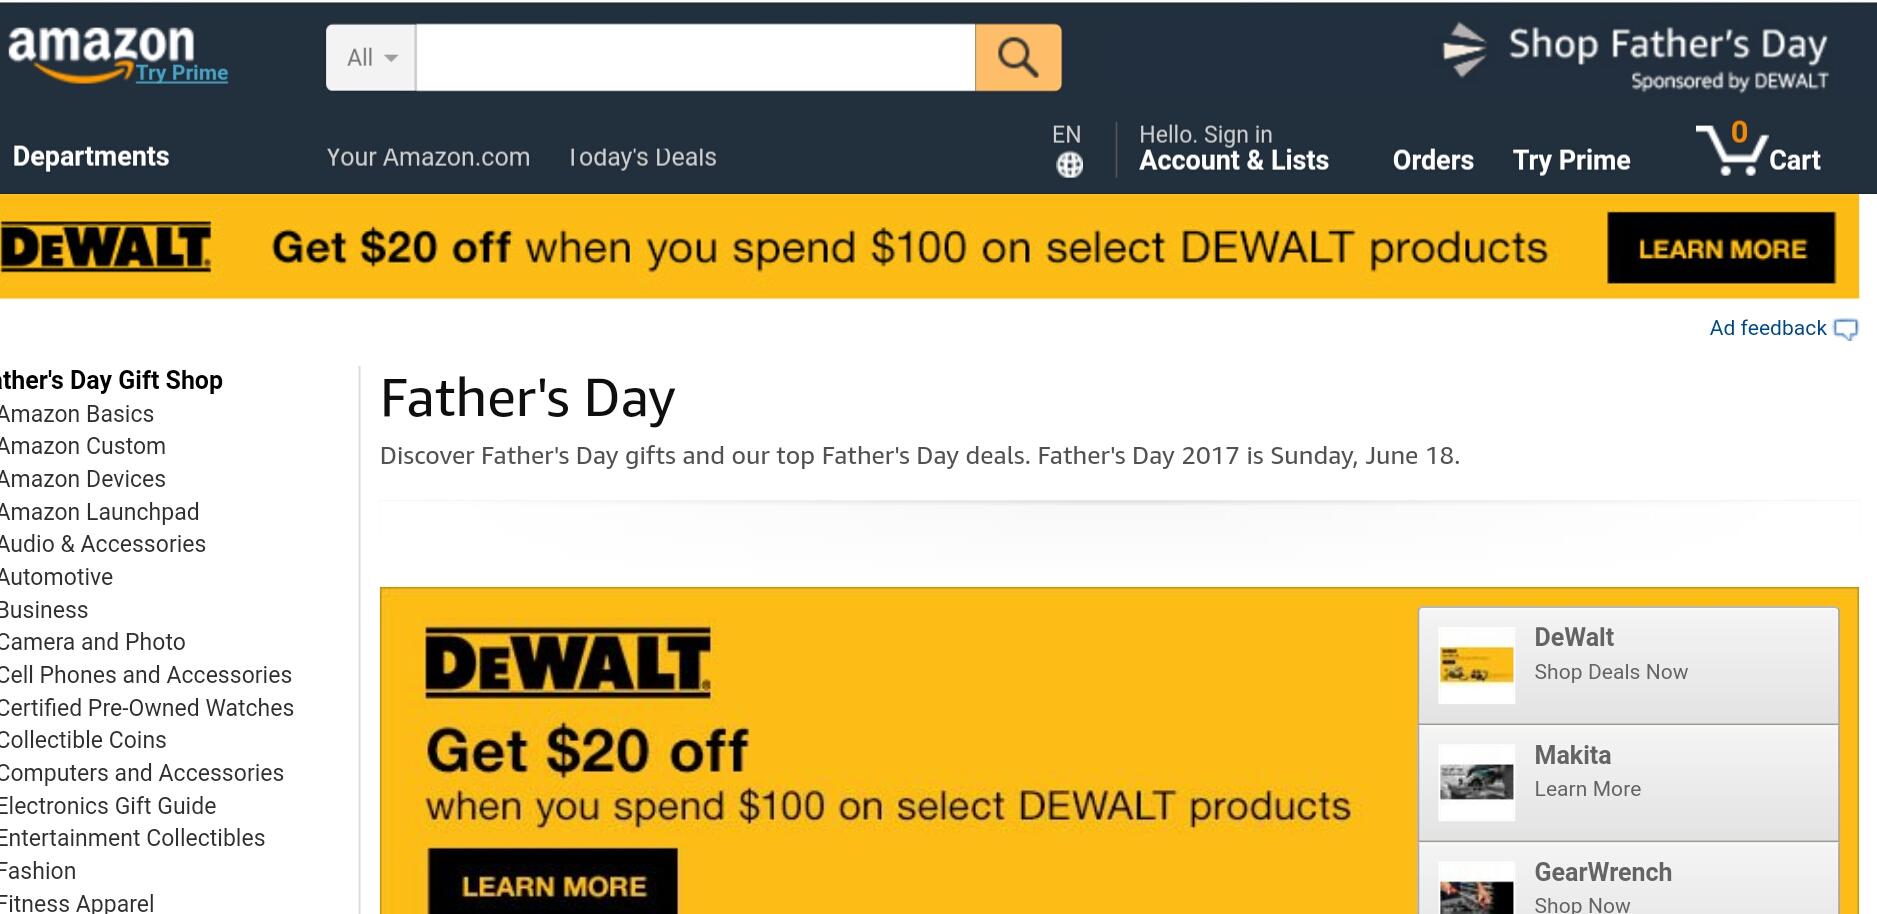 Deal Alert: Amazon cuts off prices for Alexa and Kindle devices ahead of Father's Day 3